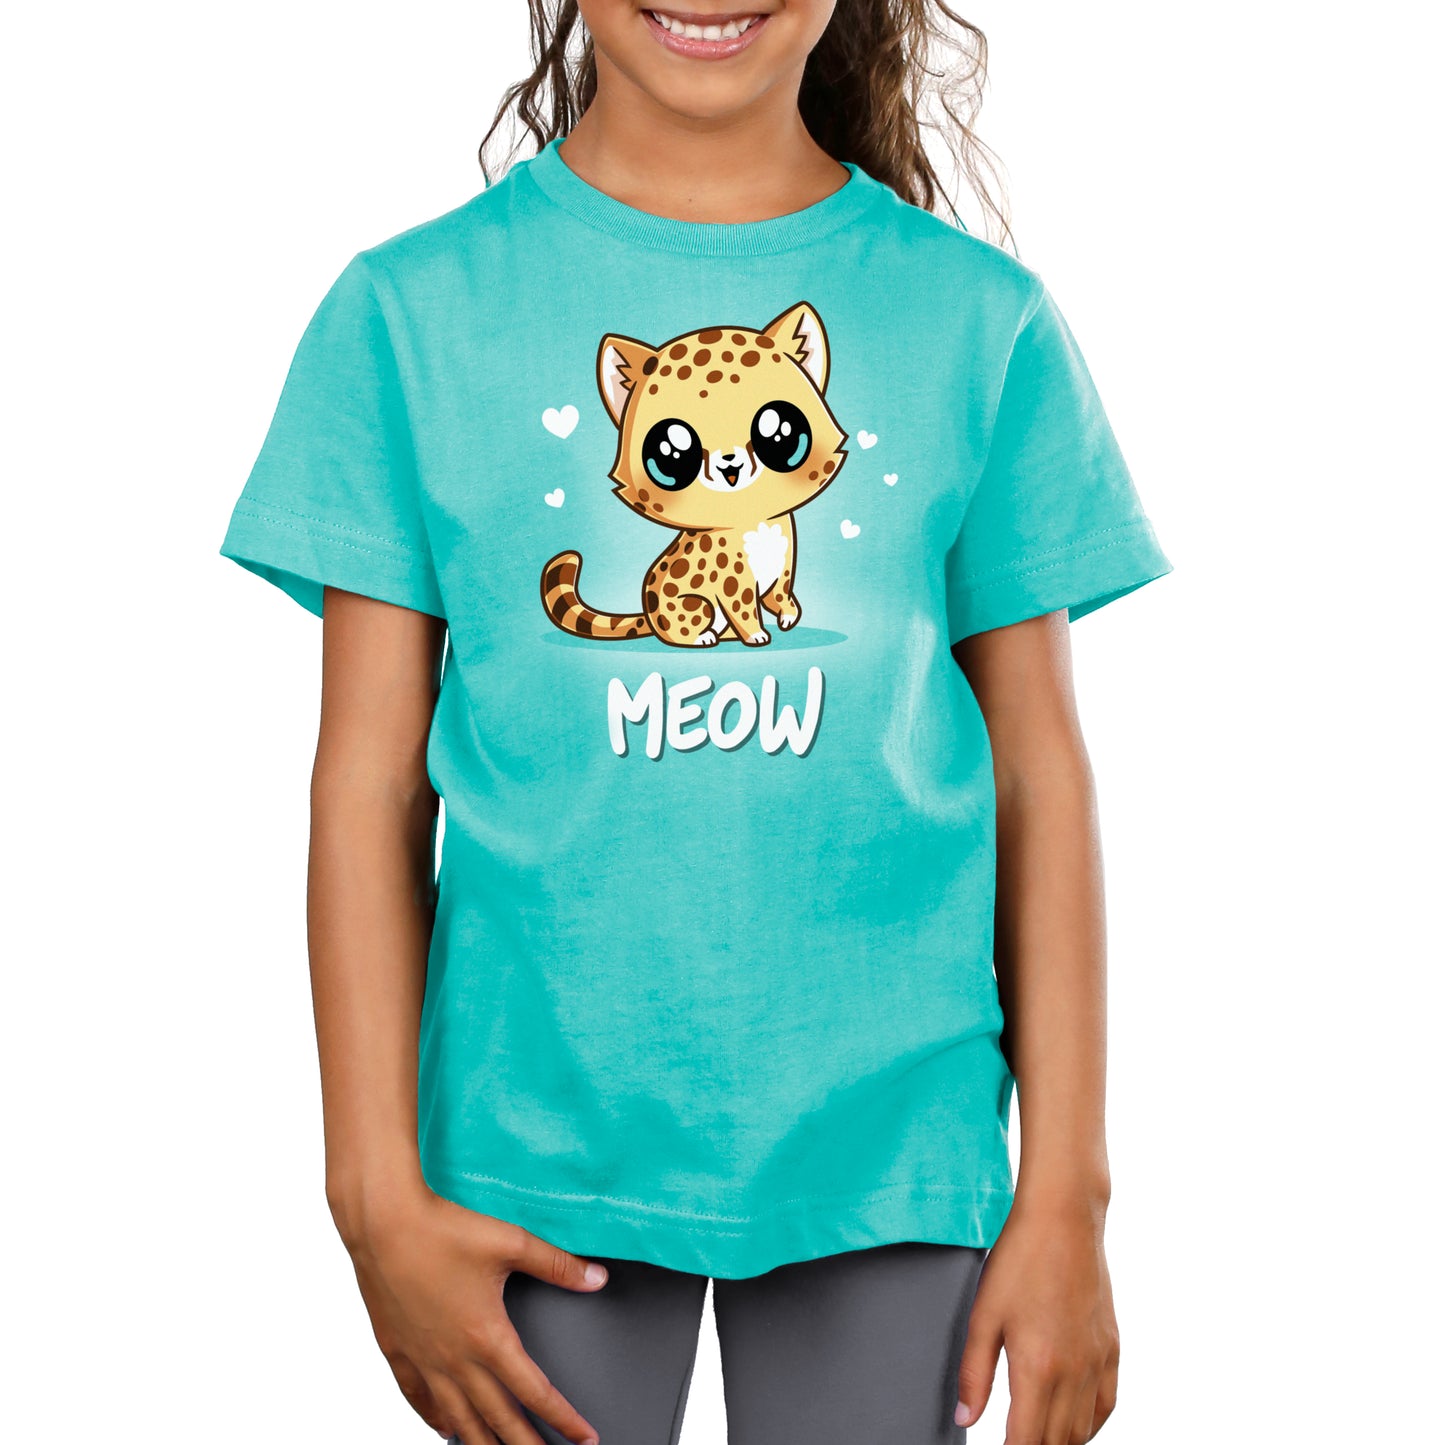 A girl wearing a TeeTurtle turquoise cheetah t-shirt that says Meow.